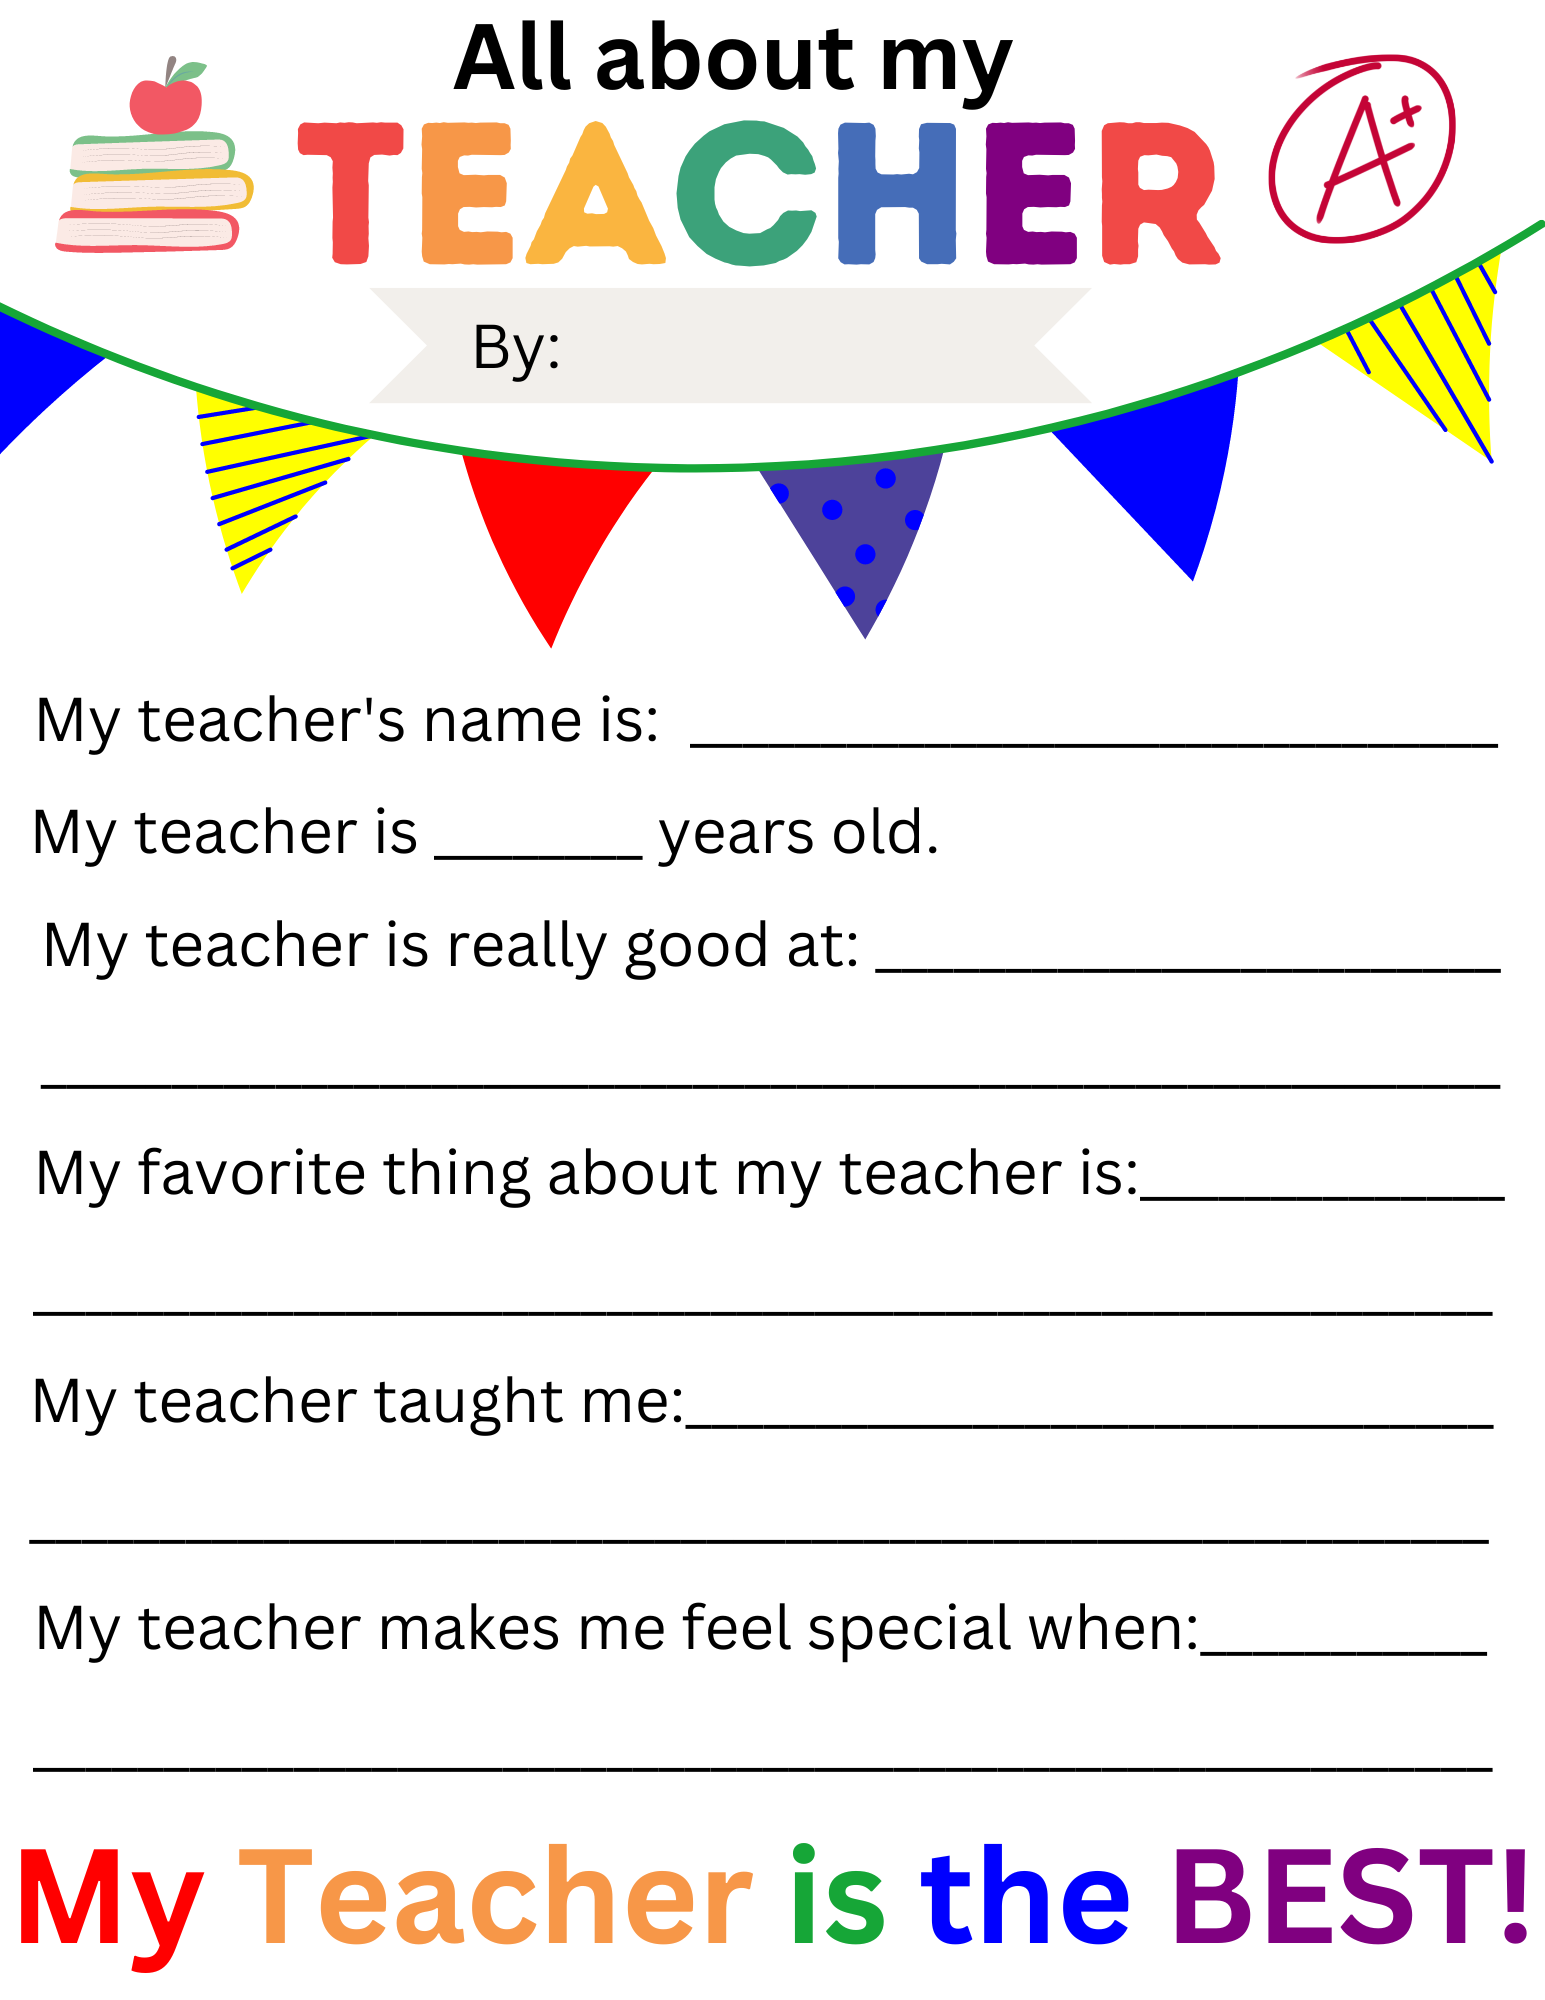 All About My Teacher Printable End of Year Gift Thank You Gift Teacher  Appreciation Fill in the Blanks Teacher Gift Teacher Card - Etsy